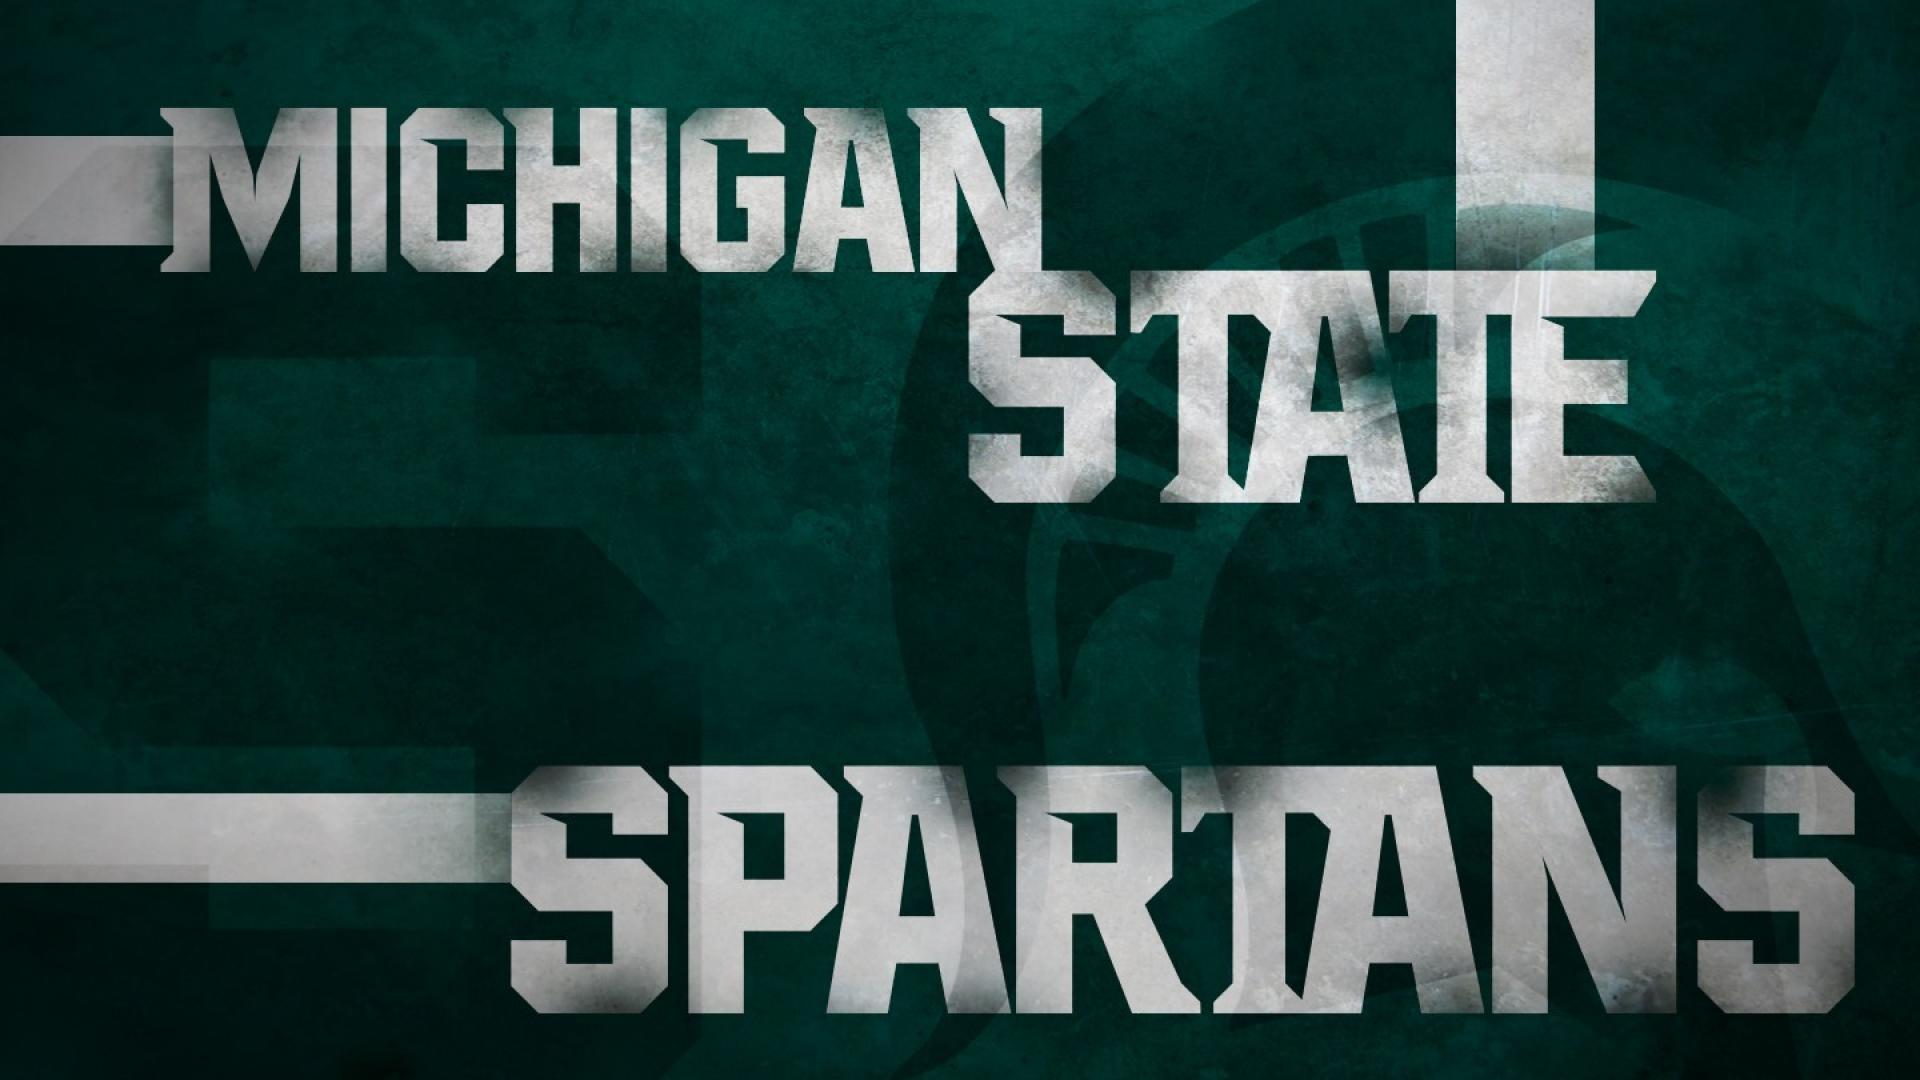 Michigan State Spartans Wallpaper Image Amp Pictures Becuo